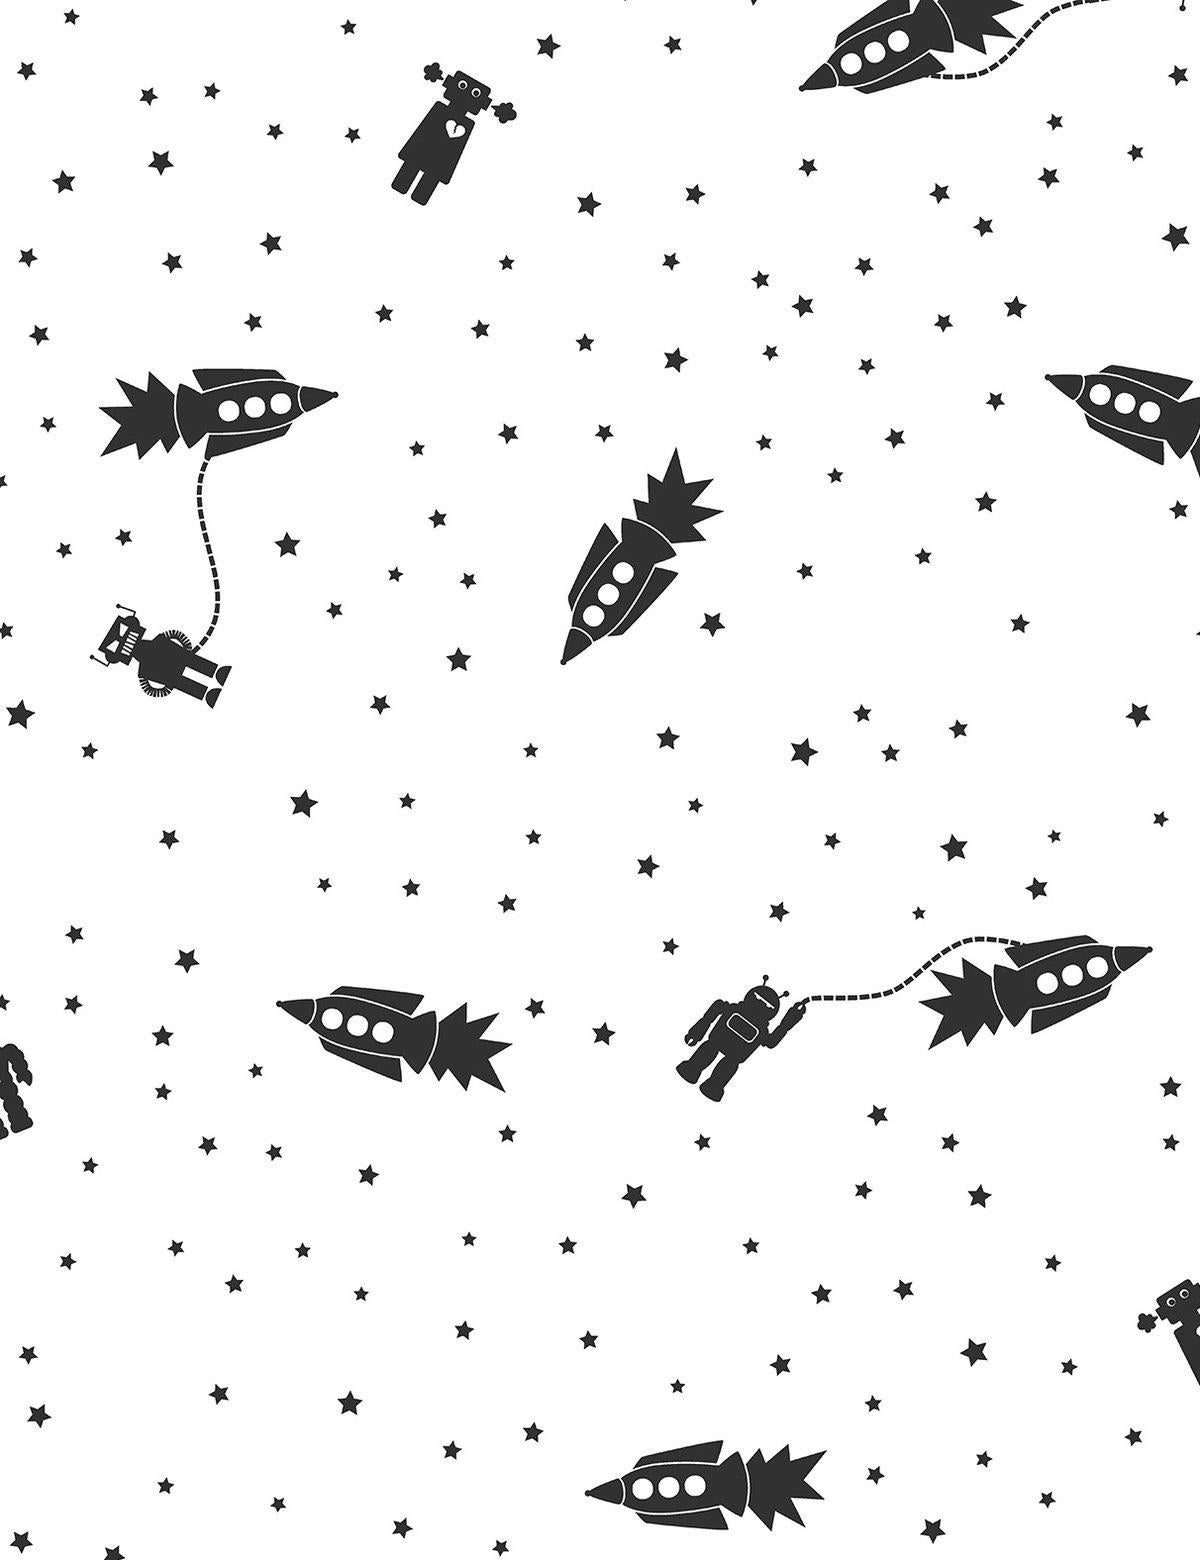 This wall-covering with a galactic scene has robots in outer space, rocket ships & more, the perfect wallpaper for your child's room.

Printing: Digital pigment print (minimum order of 4 rolls).
Material: FSC-certified paper.
Trimming: This